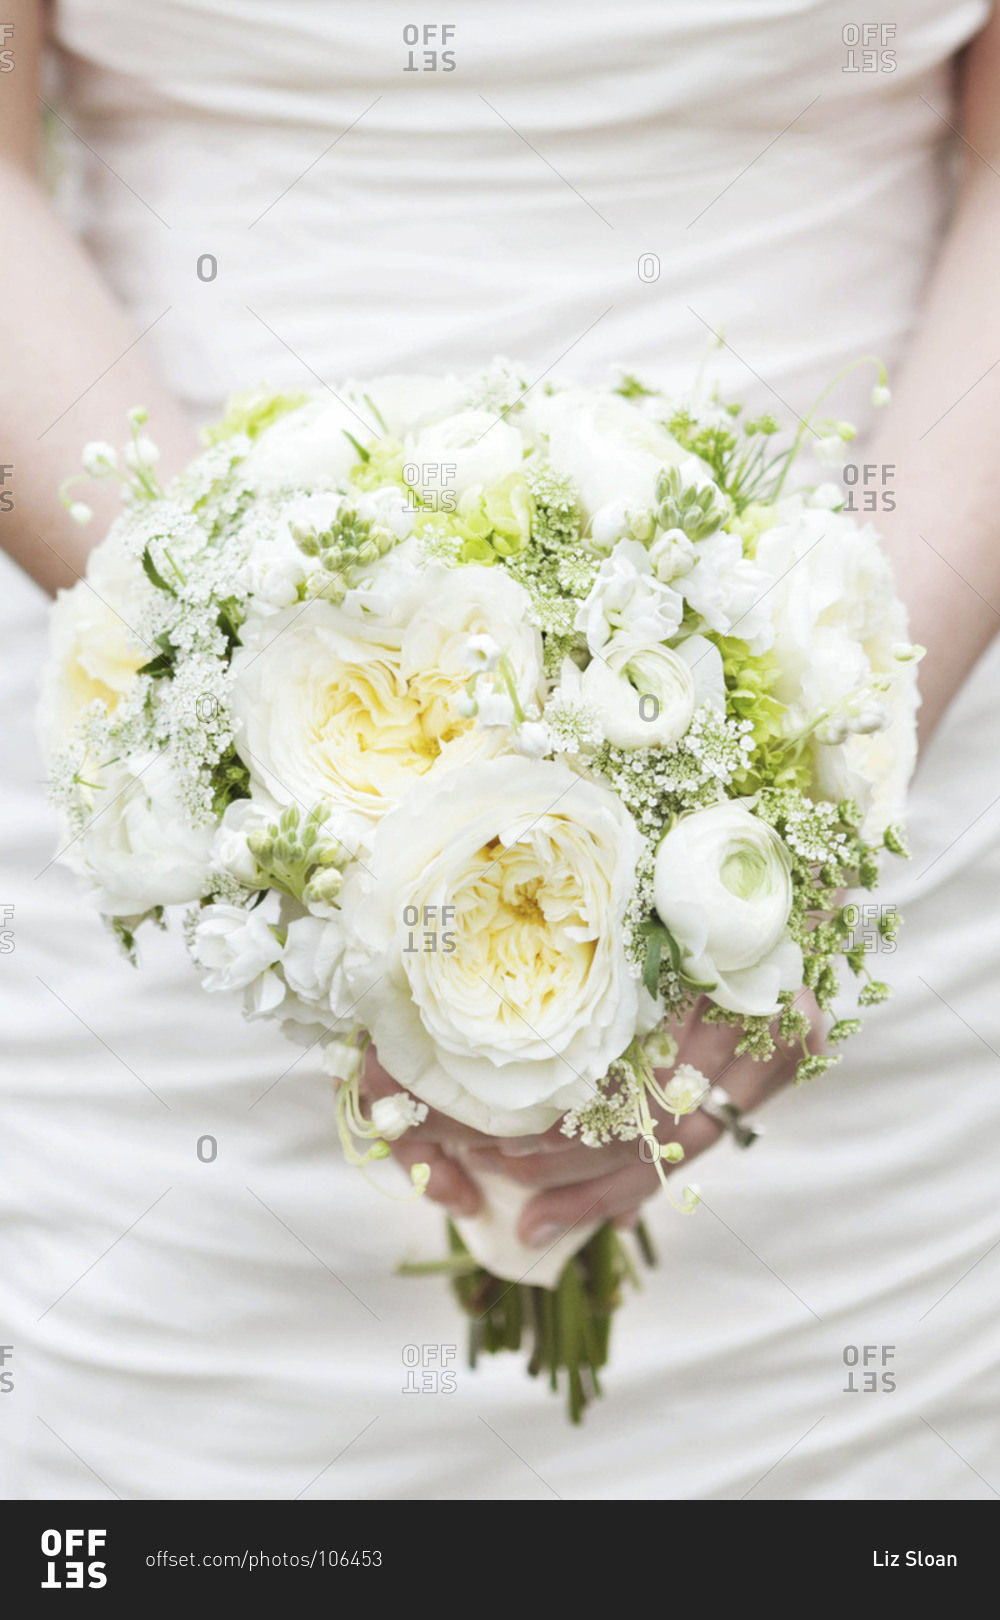 Mid section view of bride holding white peony bridal bouquet